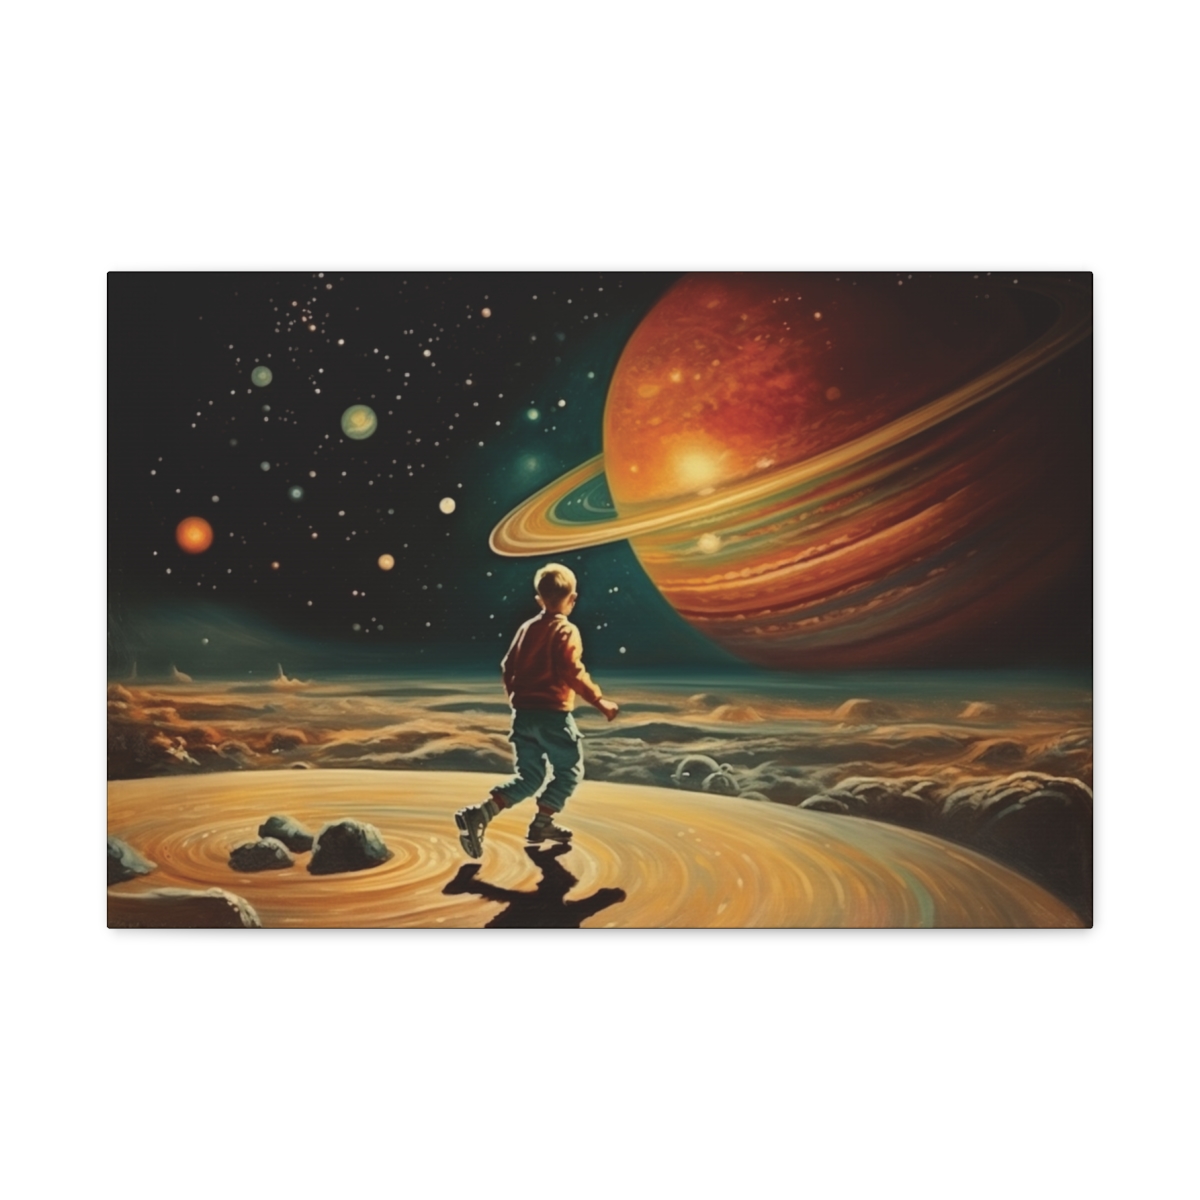 Sci-fi Art Canvas Print: The Daily Stroll Across Planets